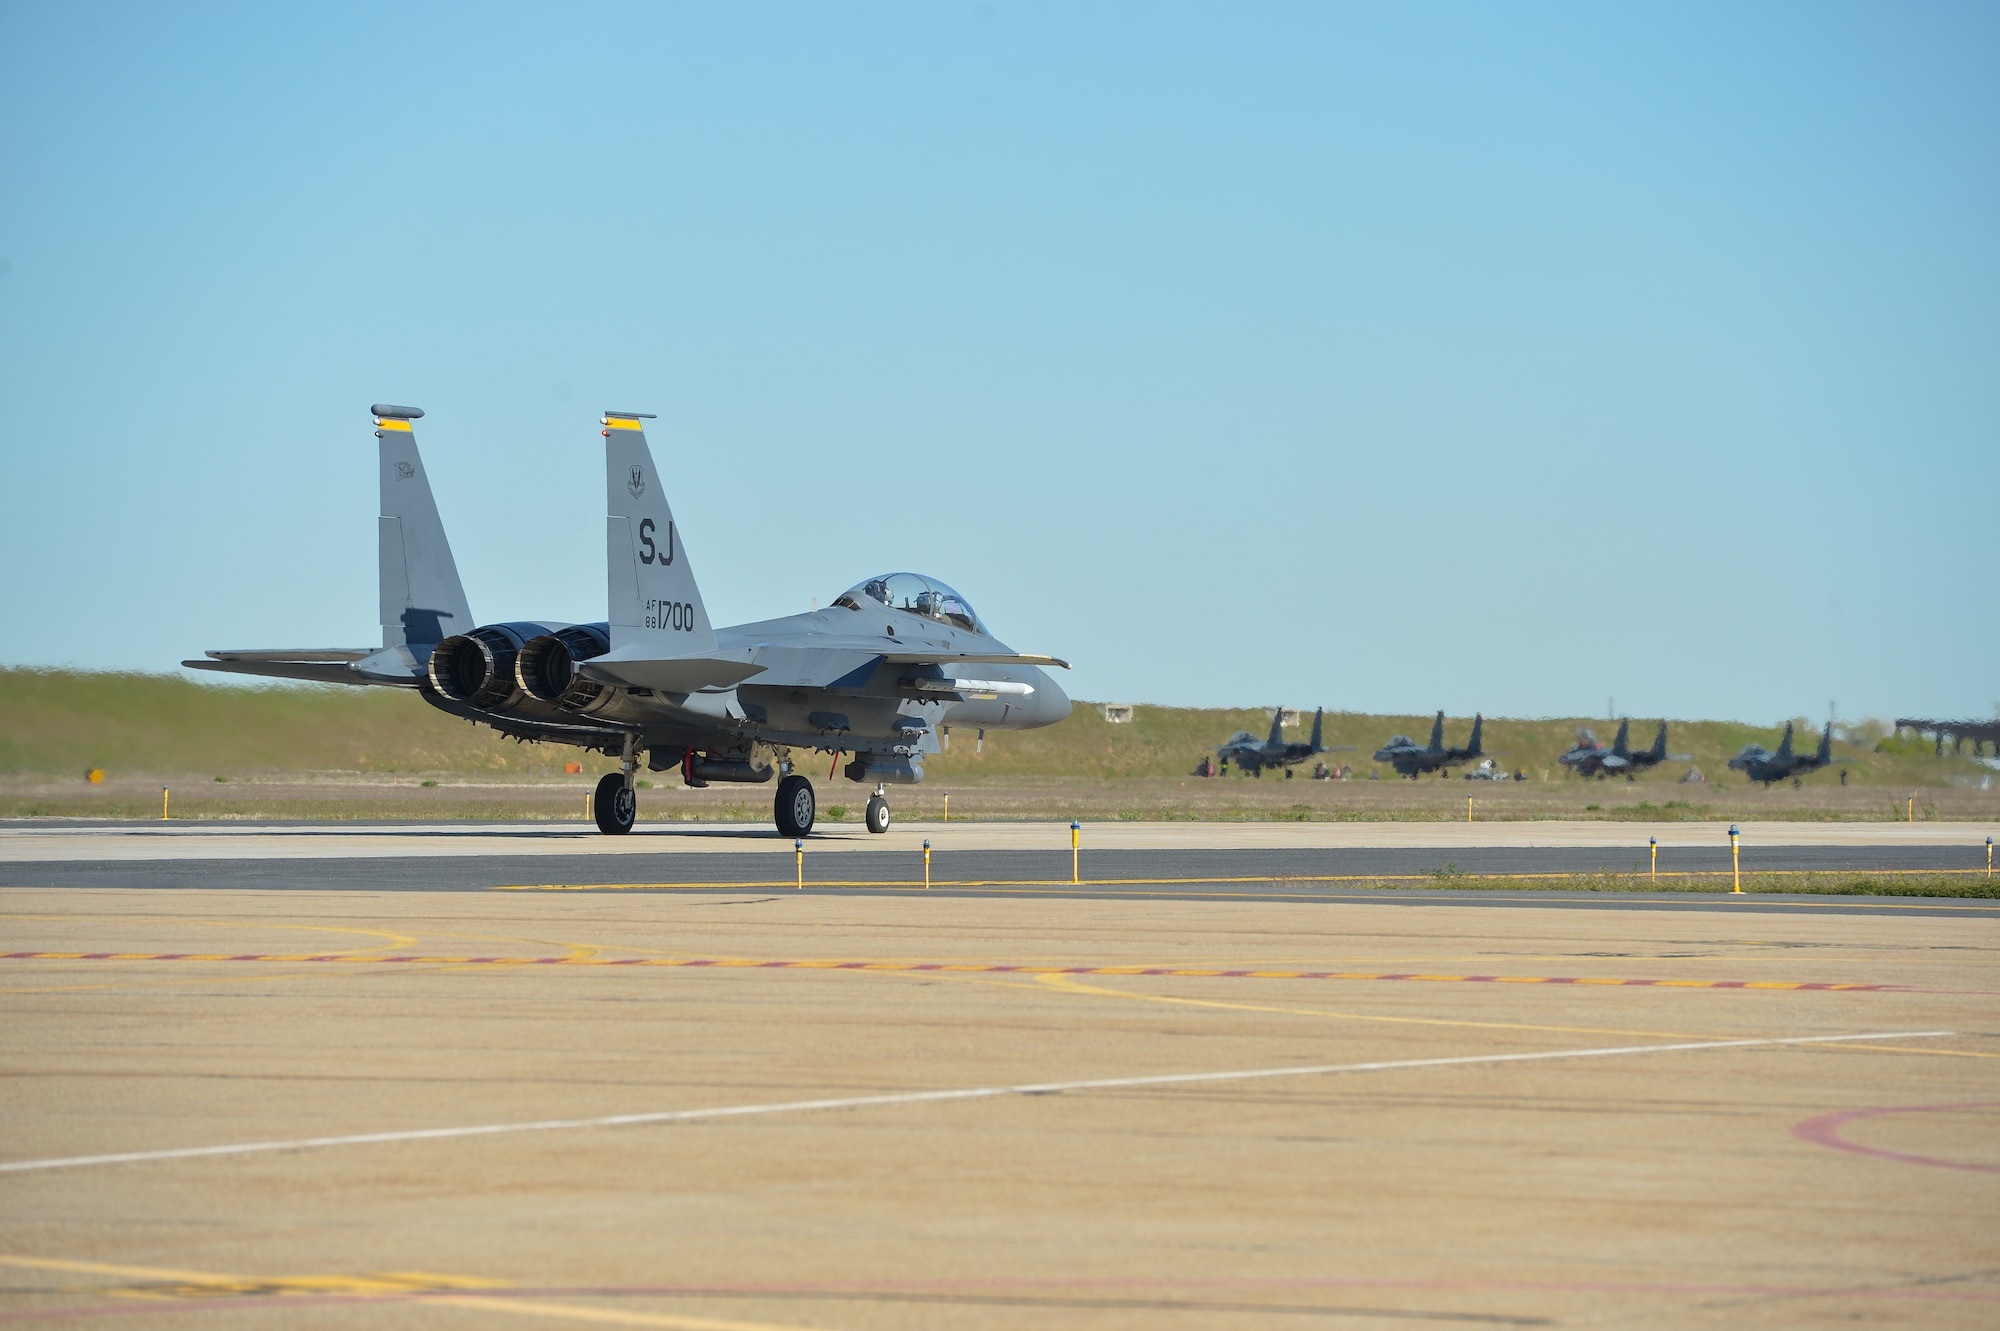 F-15E Strike Eagle aircraft from Seymour Johnson Air Force Base, North Carolina, taxi before flight May 3, 2016, at Hill AFB, Utah. The F-15Es, along with other fighter and bomber aircraft participated in the U.S. Air Force air-to-ground weapons evaluation known as Combat Hammer. Combat Hammer, which runs until May 14, tests and validates the performance of crews, pilots and their technology while deploying precision-guided munitions. (U.S. Air Force photo by R. Nial Bradshaw)